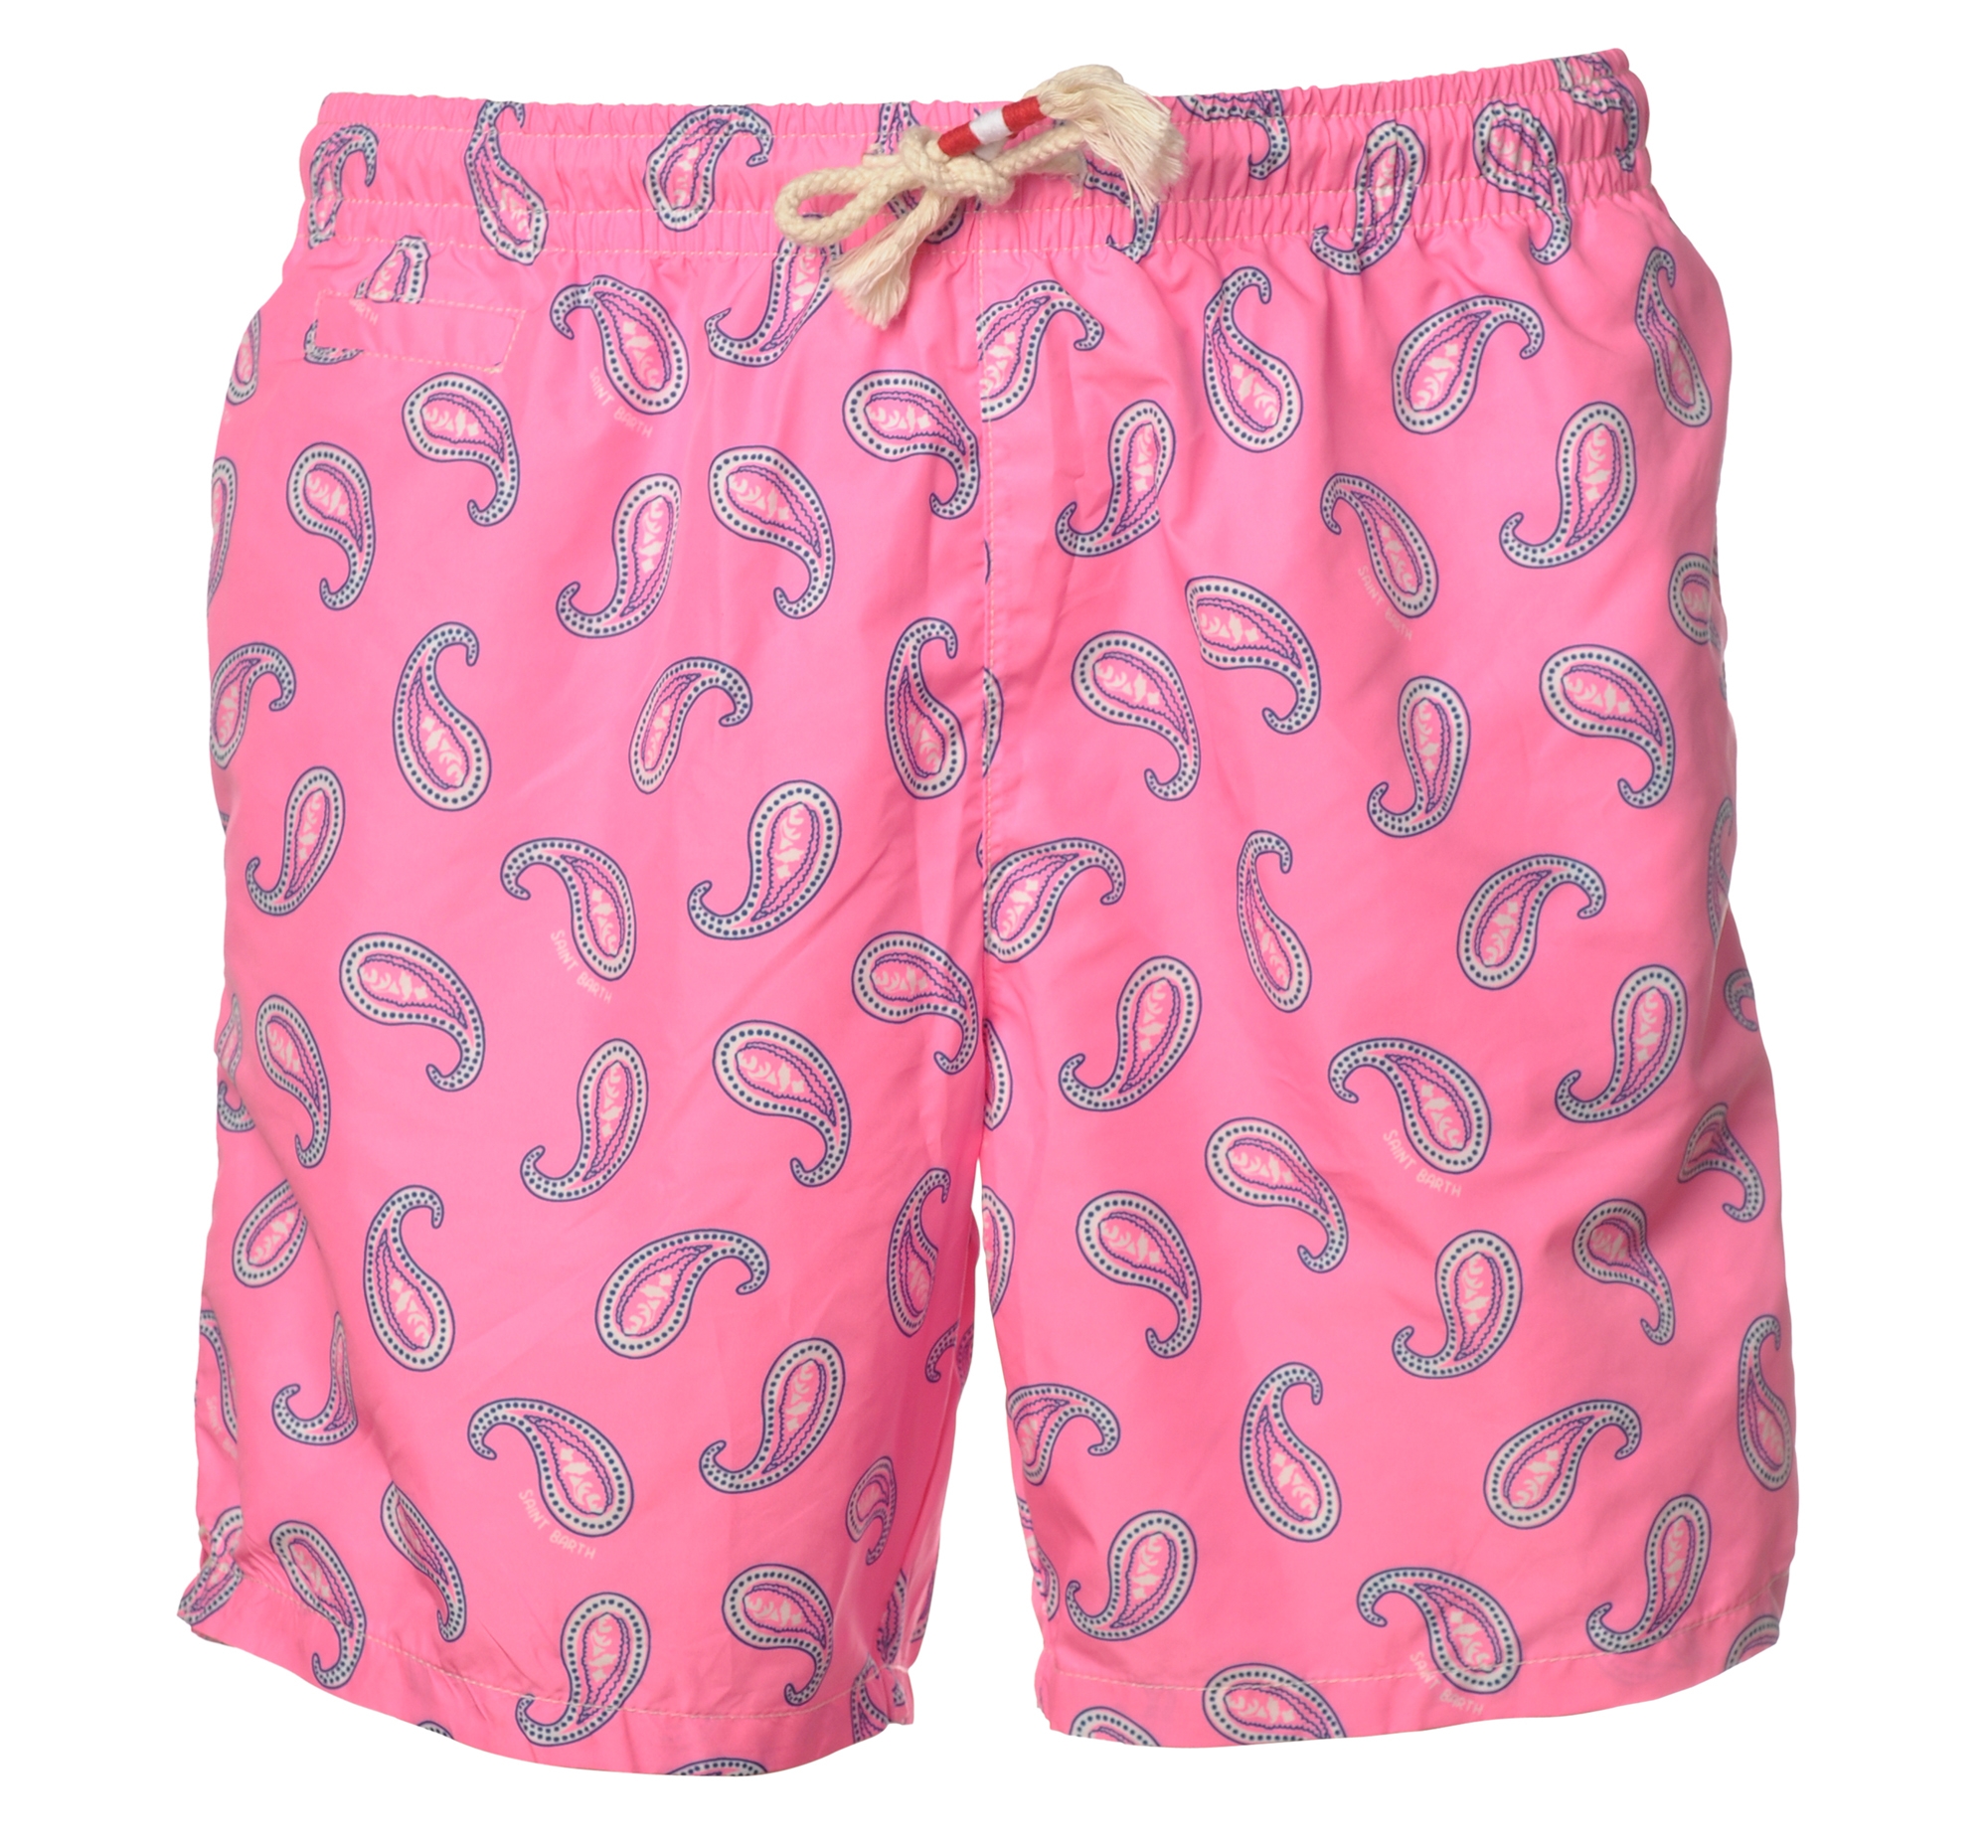 https://avvenice.com/145977/mc2-saint-barth-boxer-swimsuit-in-cashmere-pattern-fuxia-luxury-exclusive-collection.jpg